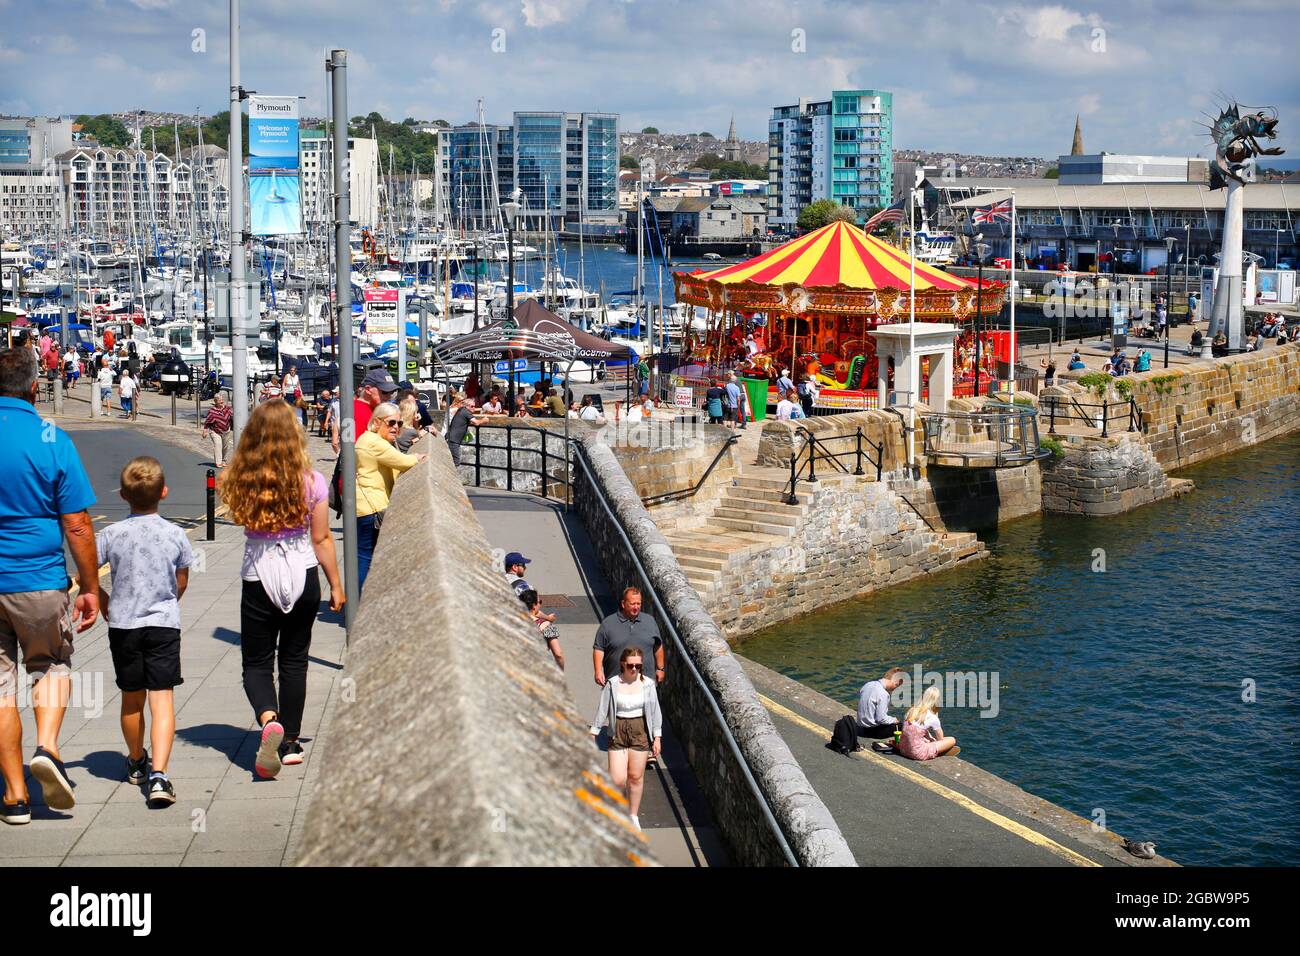 The Barbican in Plymouth, Devon, UK. View looking towards Sutton Harbour with the Mayflower Steps seen in front of the Victorian Carousel. Stock Photo